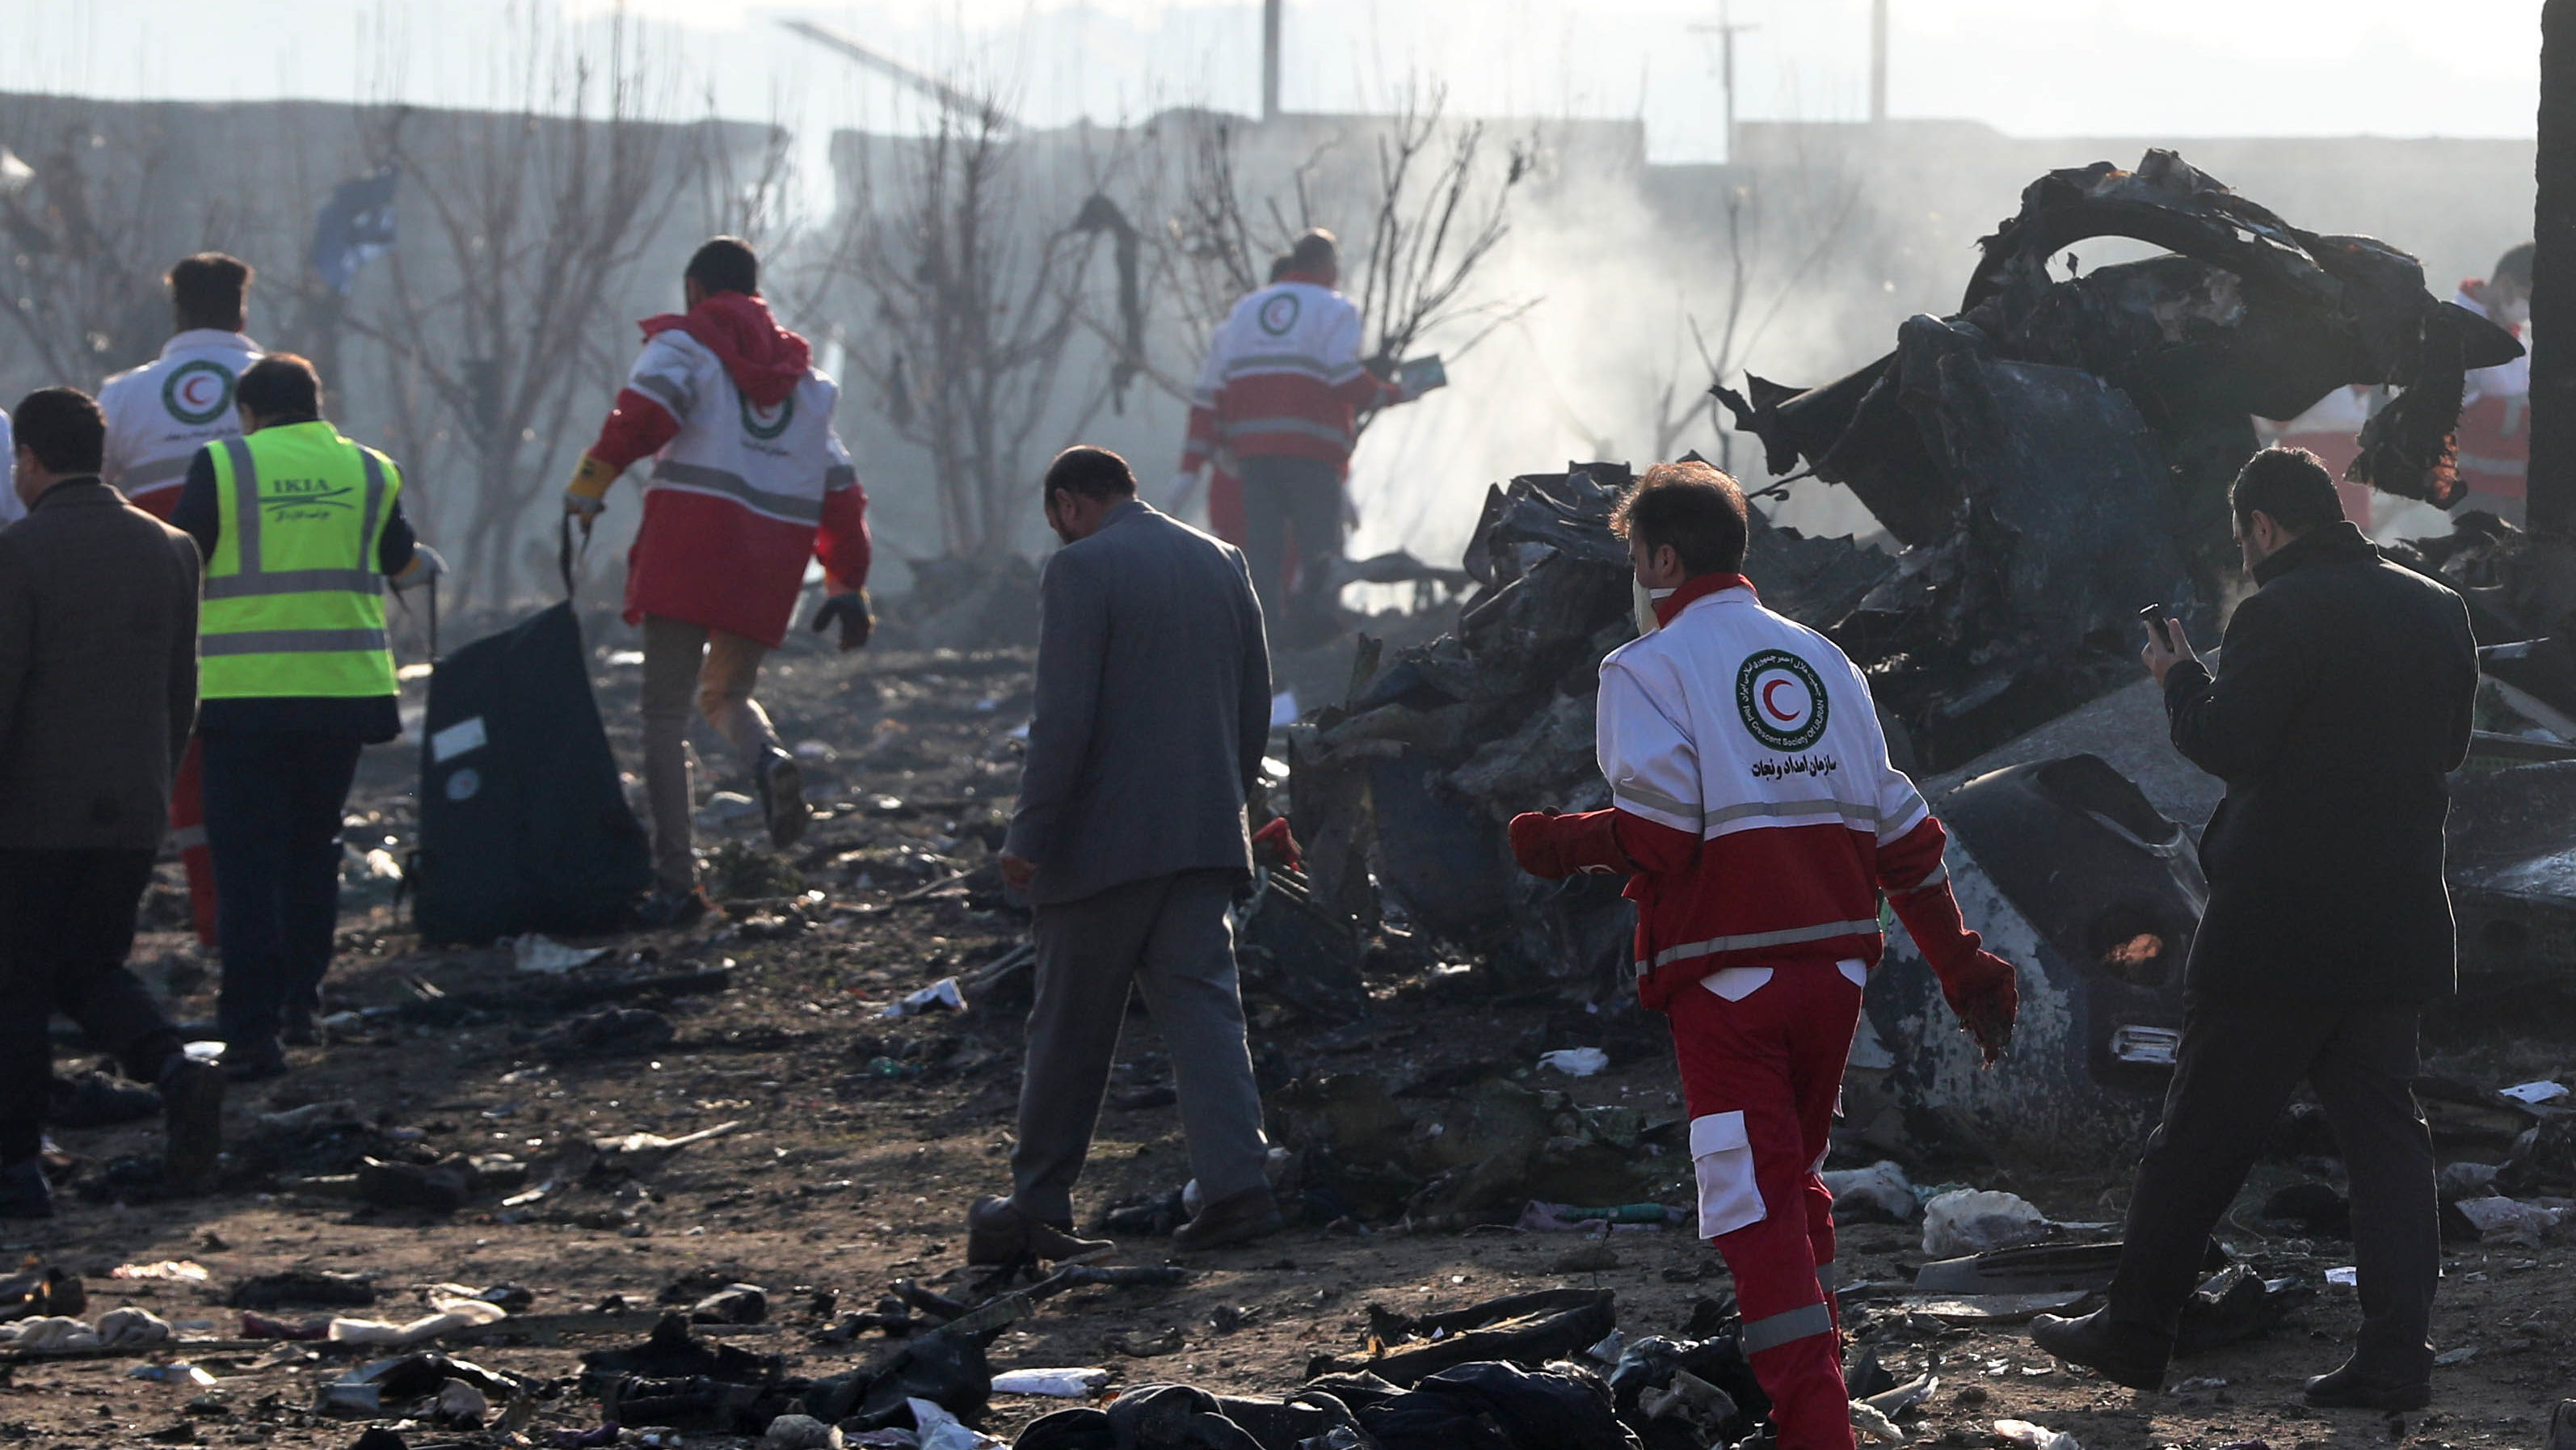 Ukraine Wants More Answers from Iran over January Airliner Downing